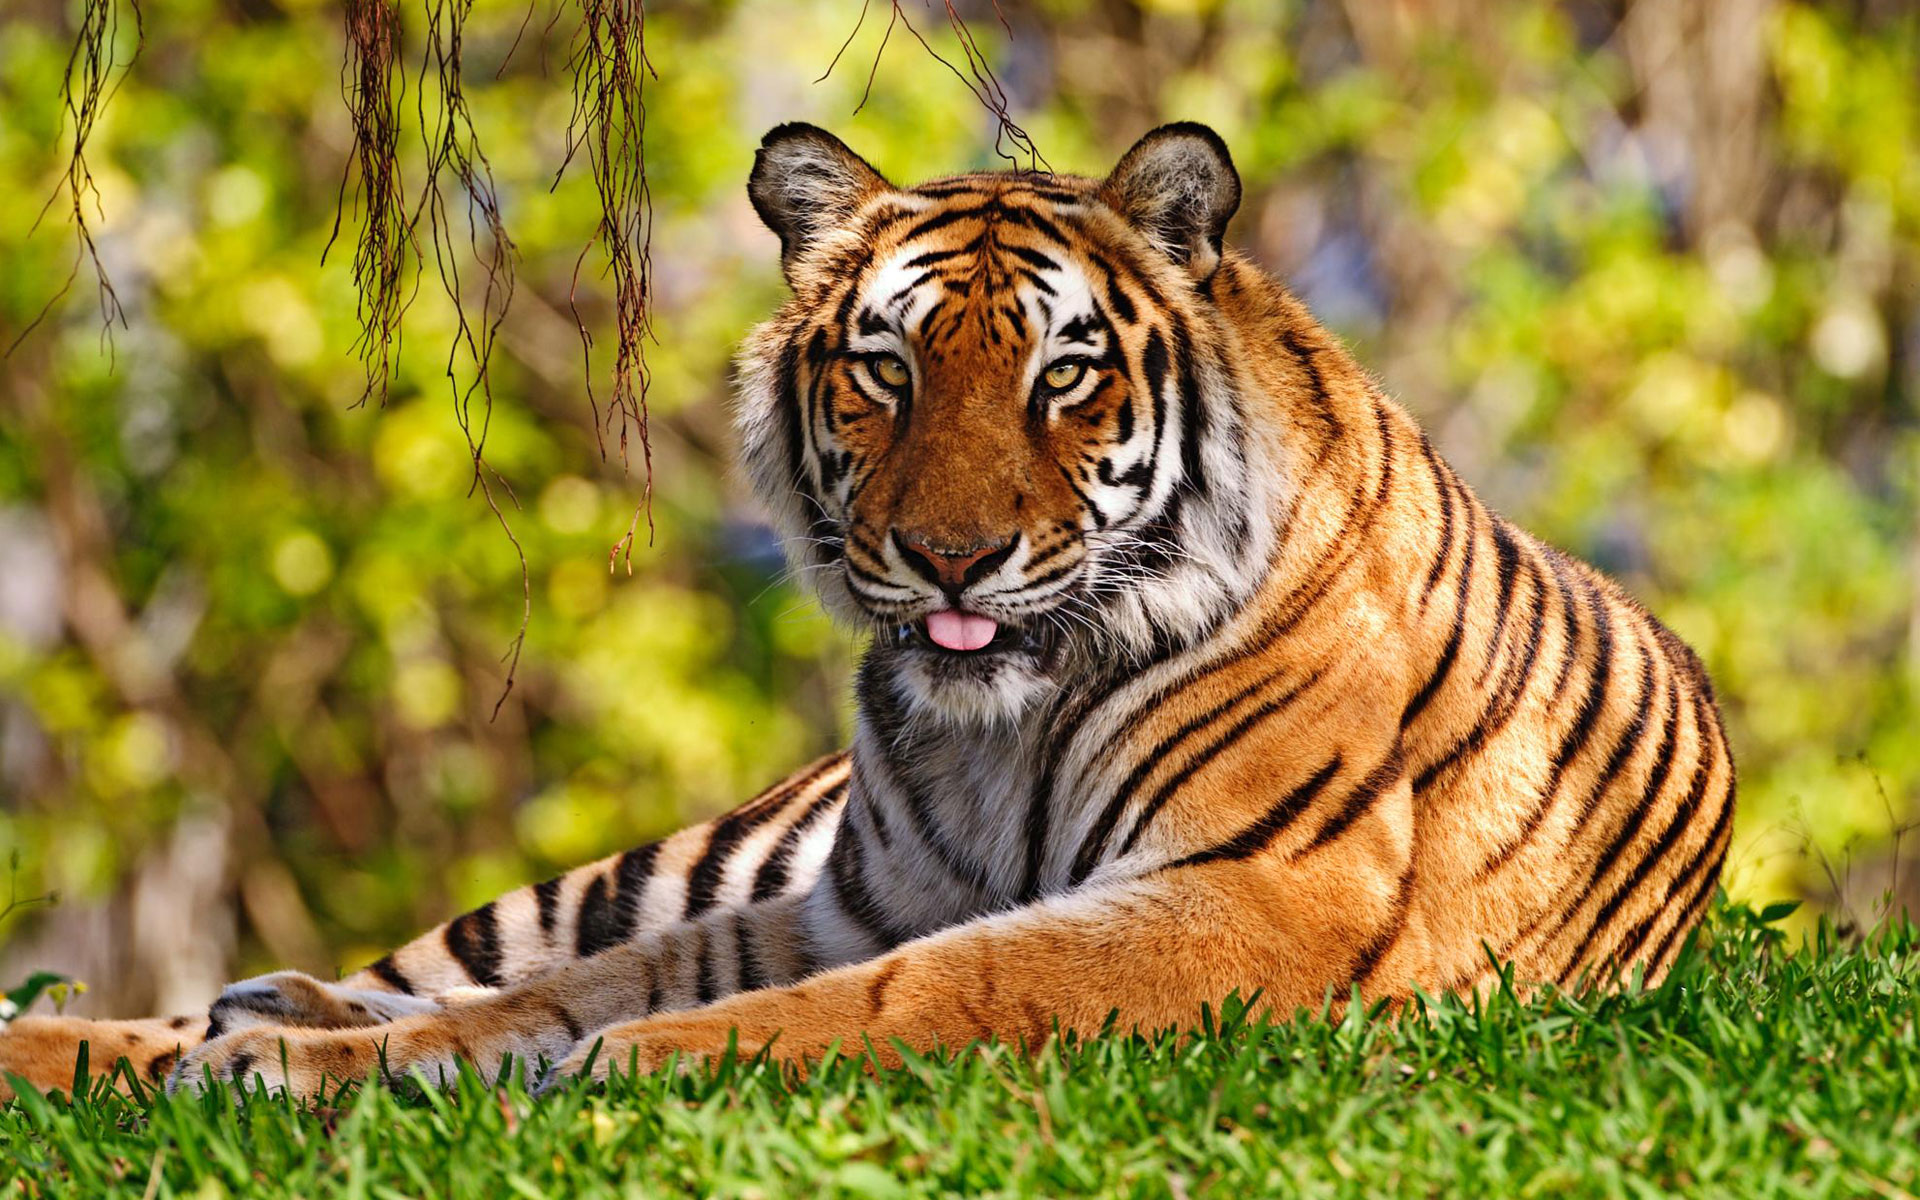 High Definition tiger wallpaper for free download